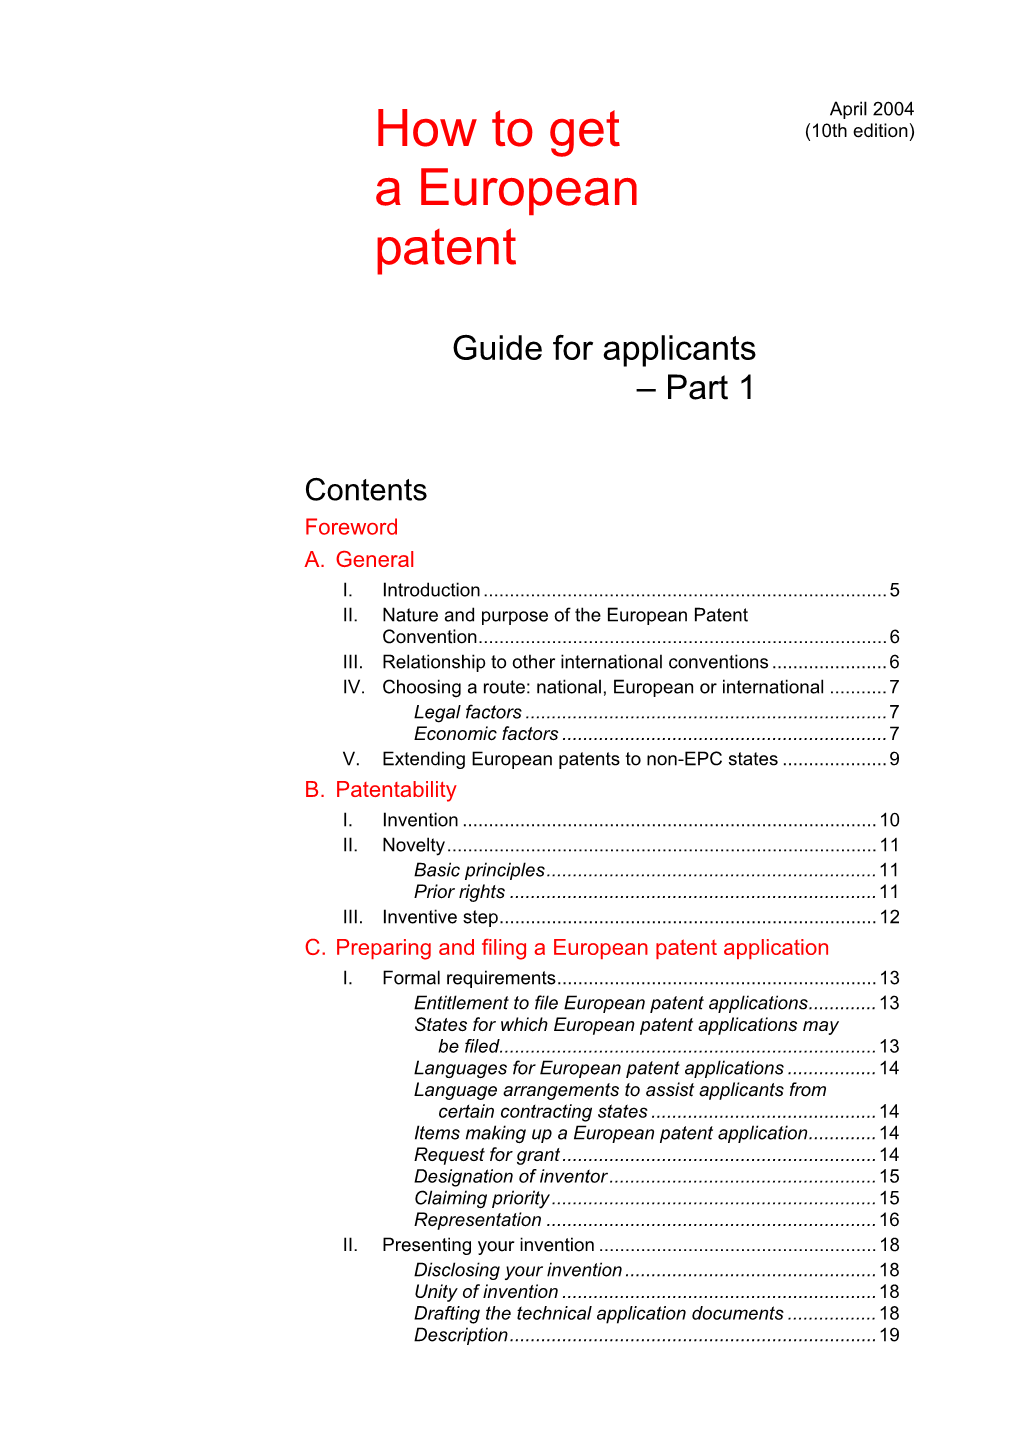 How to Get a European Patent, Guide for Applicants – Part 2, Euro-PCT, 2Nd Edition, April 2002, See Point 8 Below)